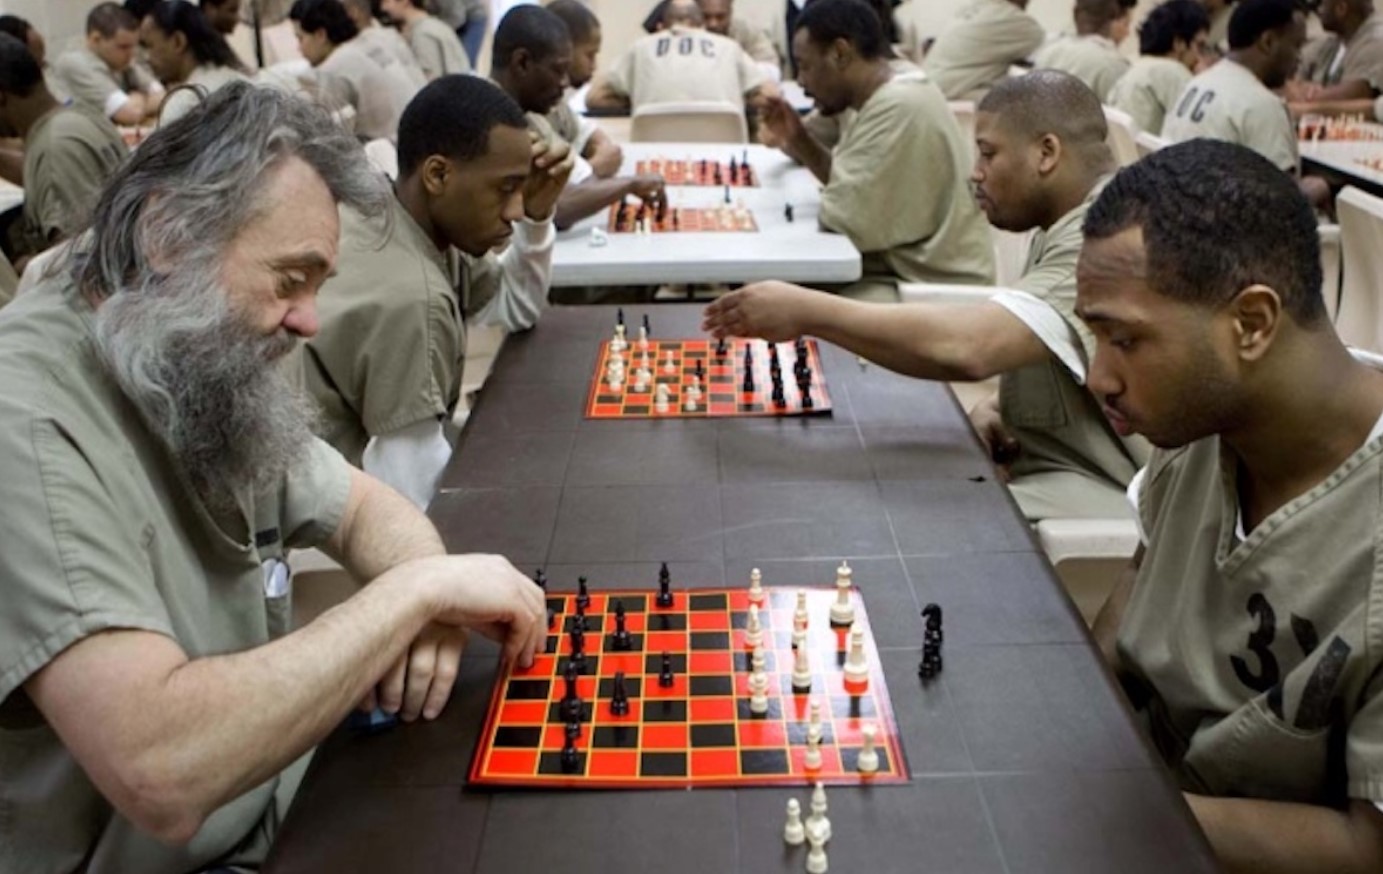 Do you know the Most Popular Betting Games Within Prison